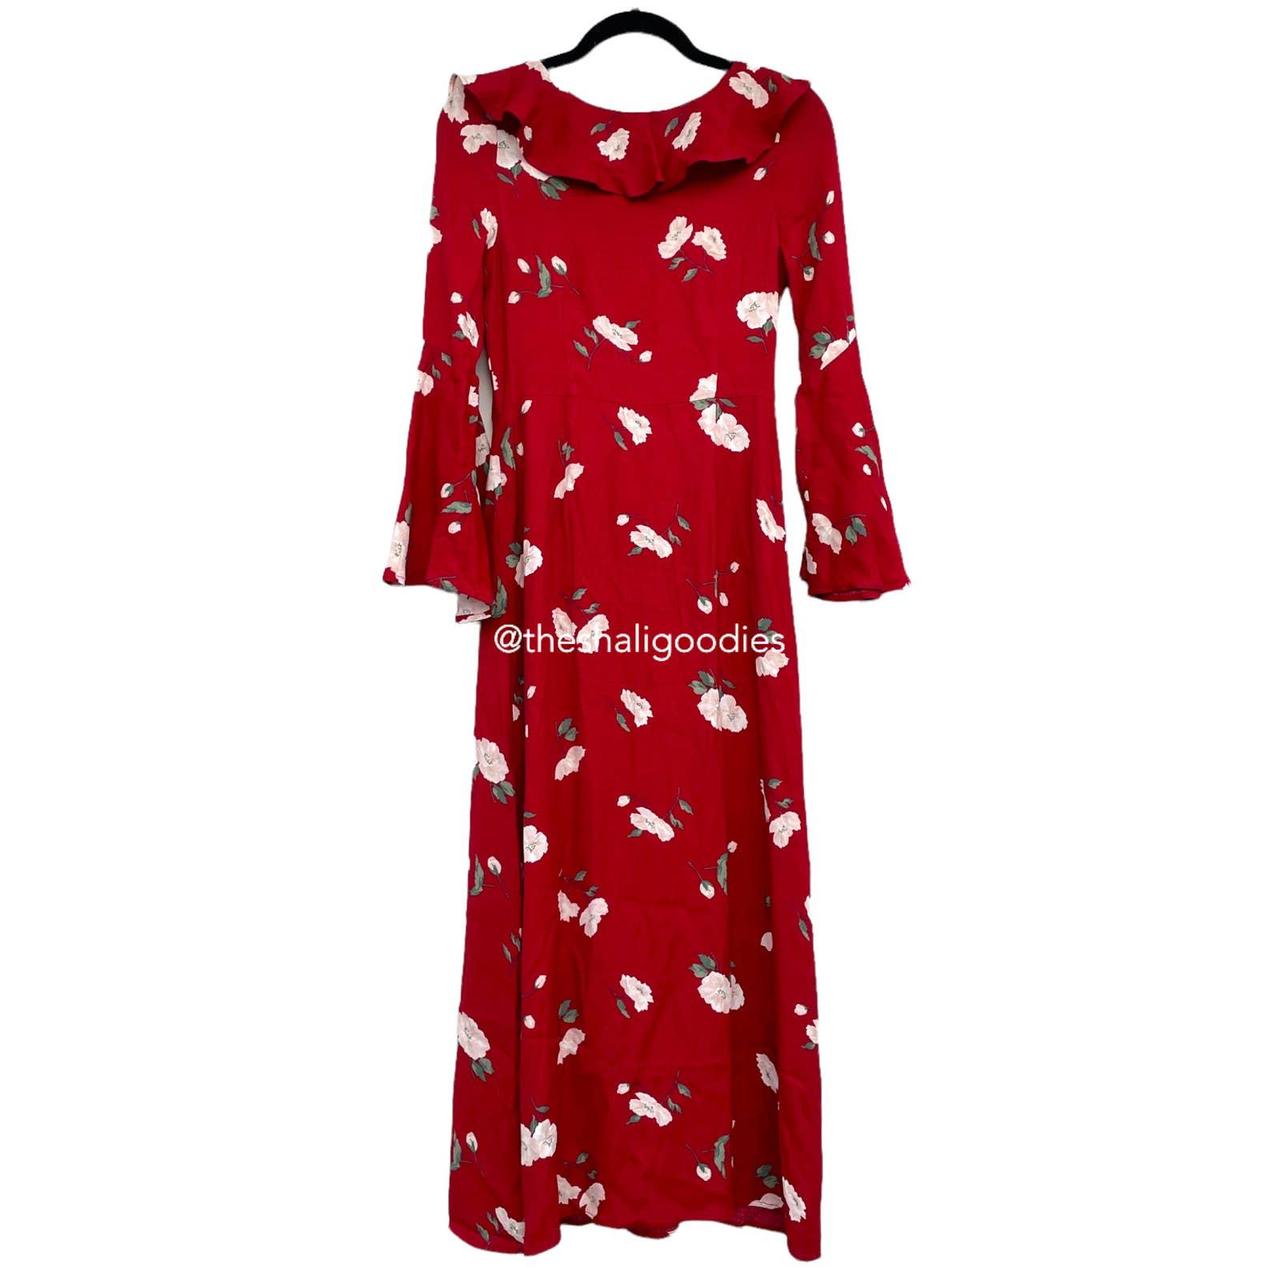 Product Image 2 - CHRISTY DAWN Florence Dress

100%  New 